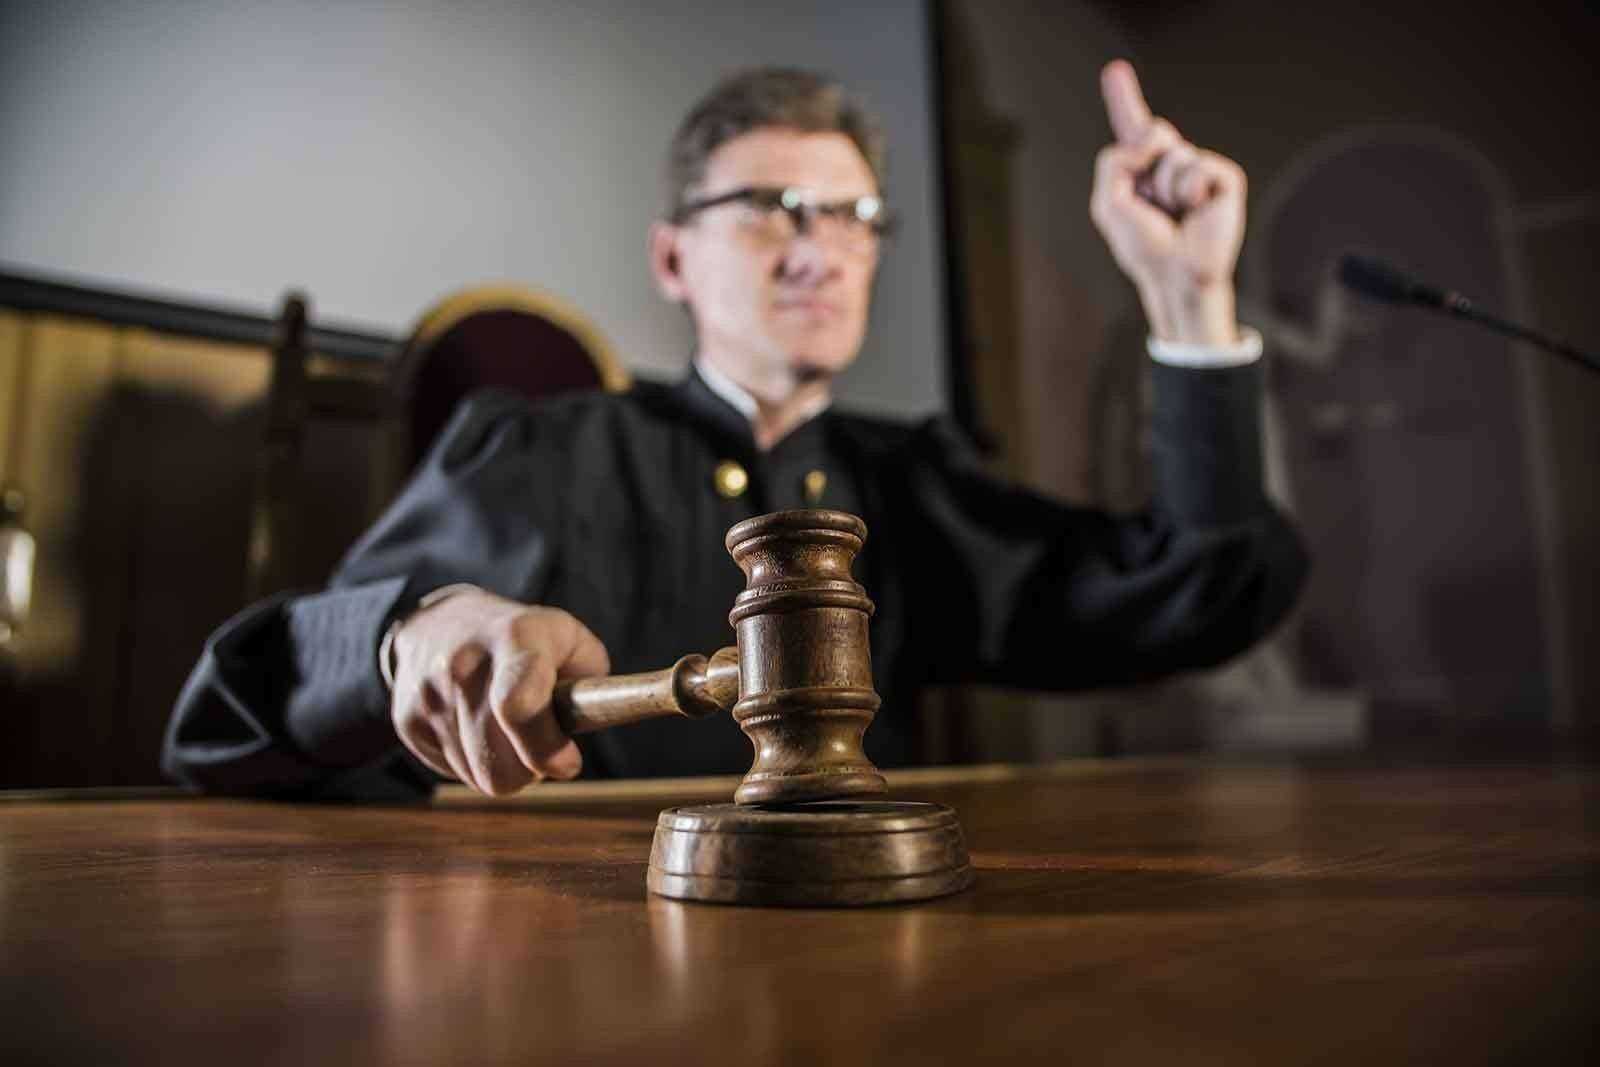 This Judge Fined Himself Over a Smartphone